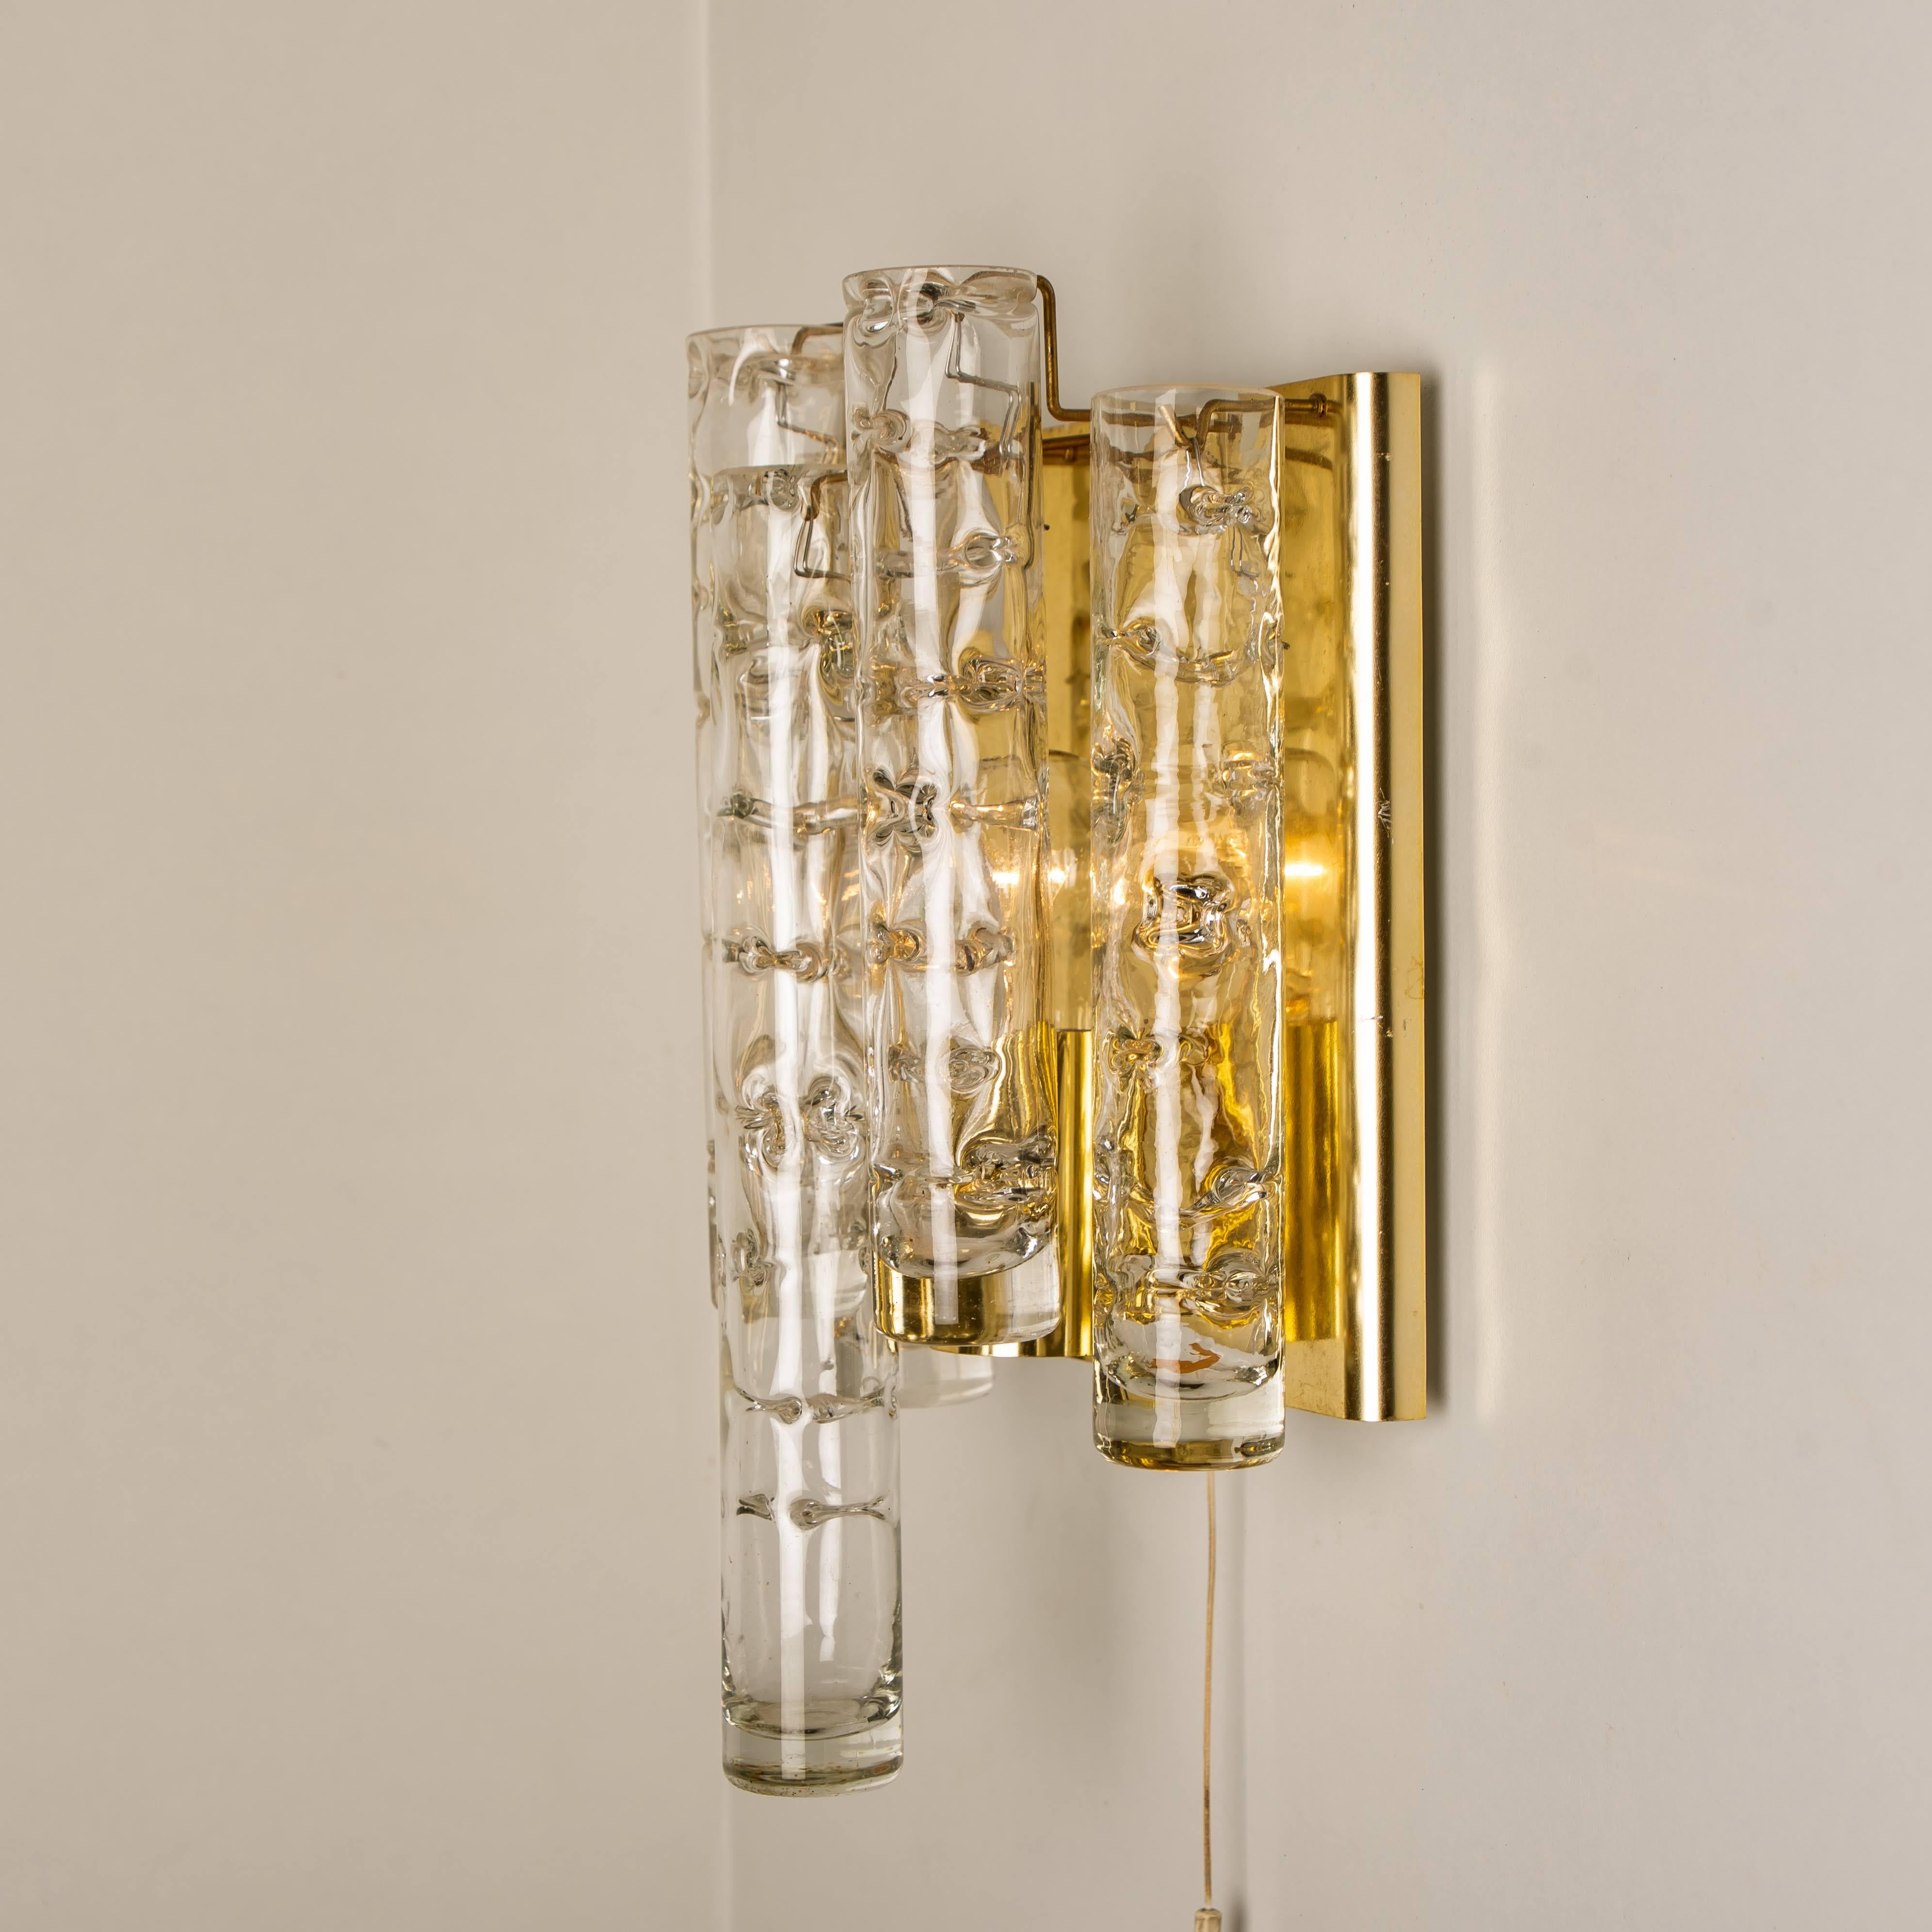 Pair of Doria Wall Lamps in Brass and Glass, 1960s For Sale 6